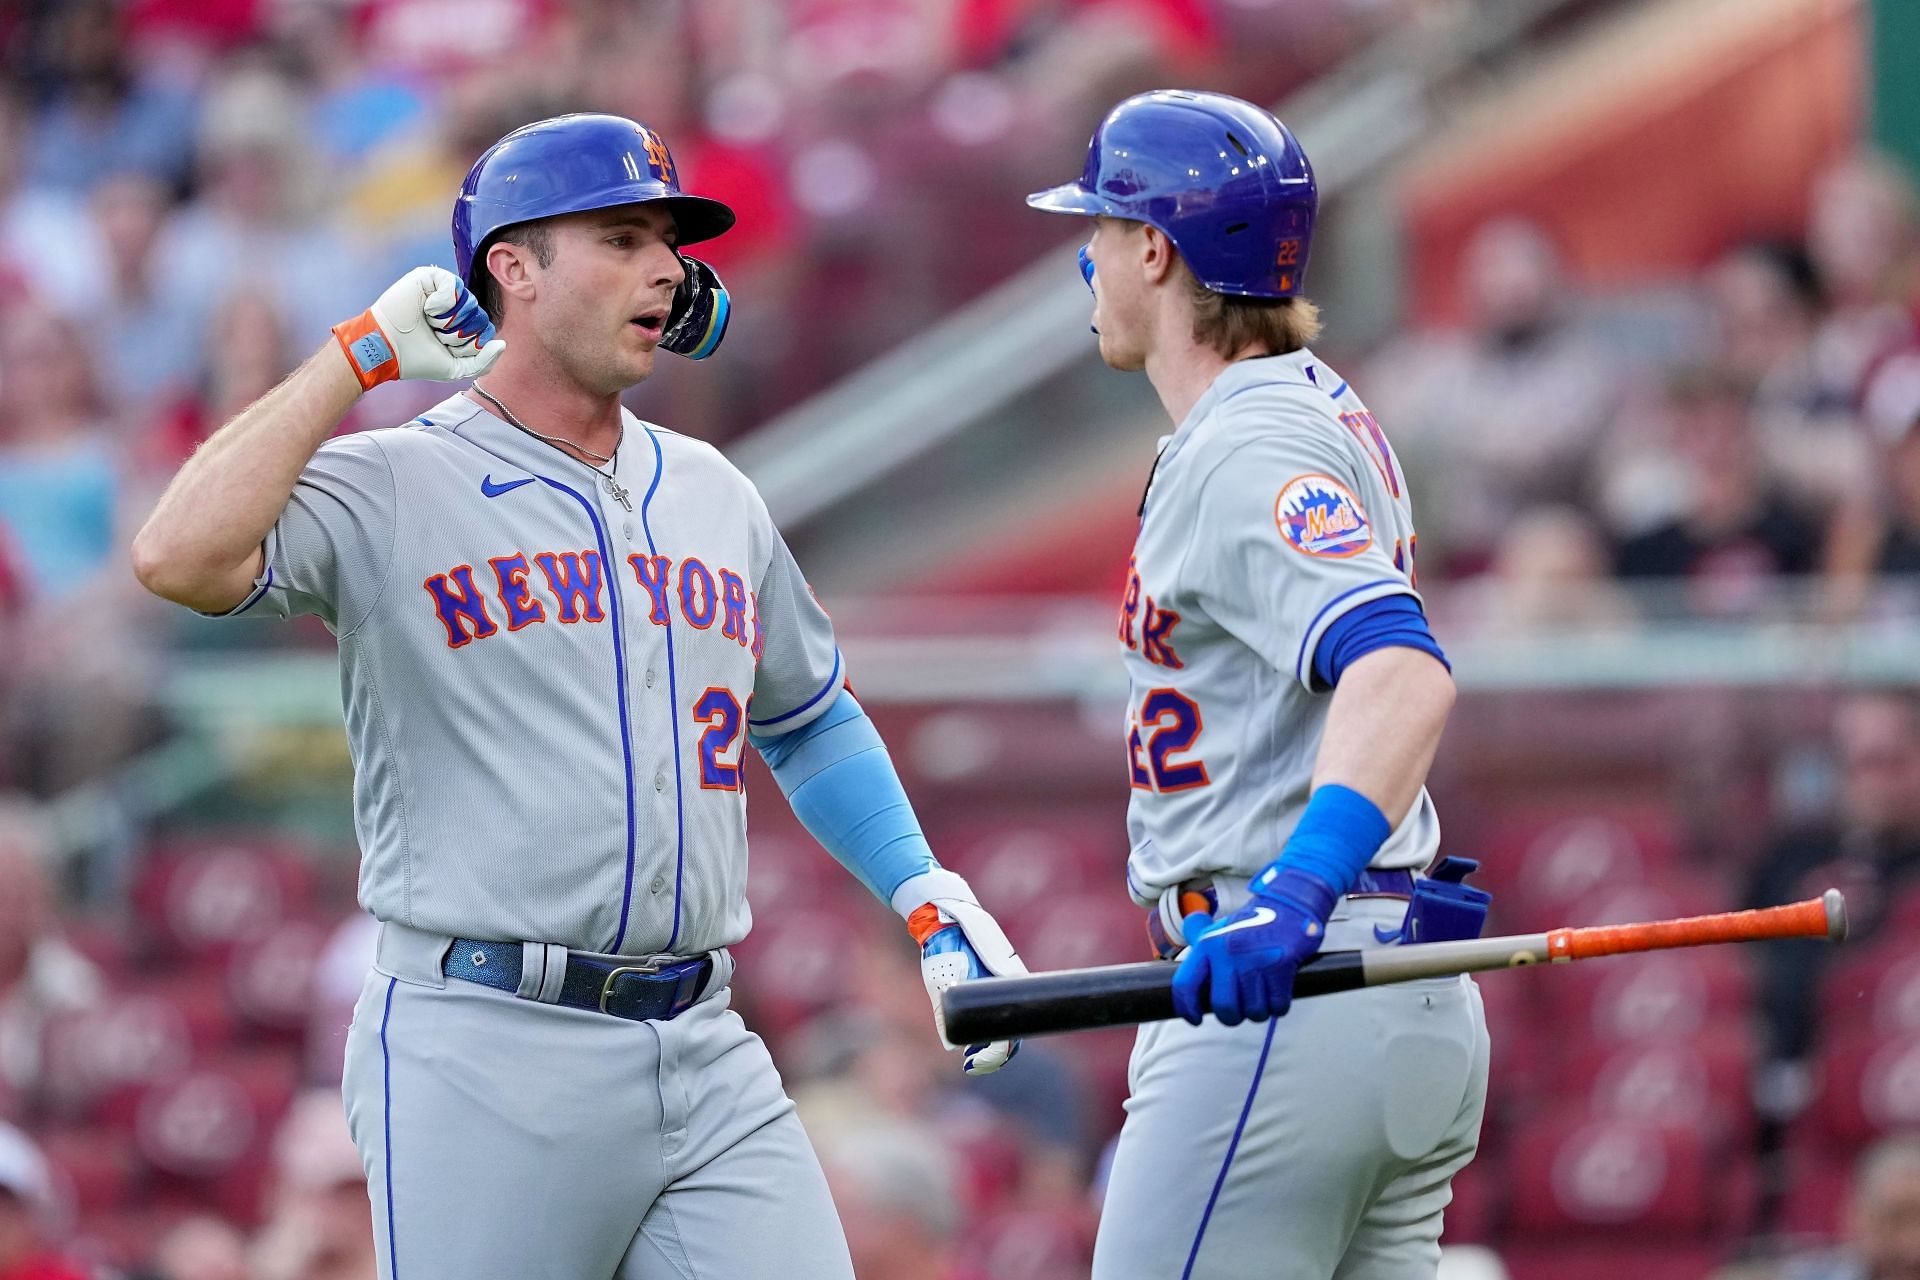 Pete Alonso #20 and Brett Baty #22 of the New York Mets celebrate after Alonso hit a home run